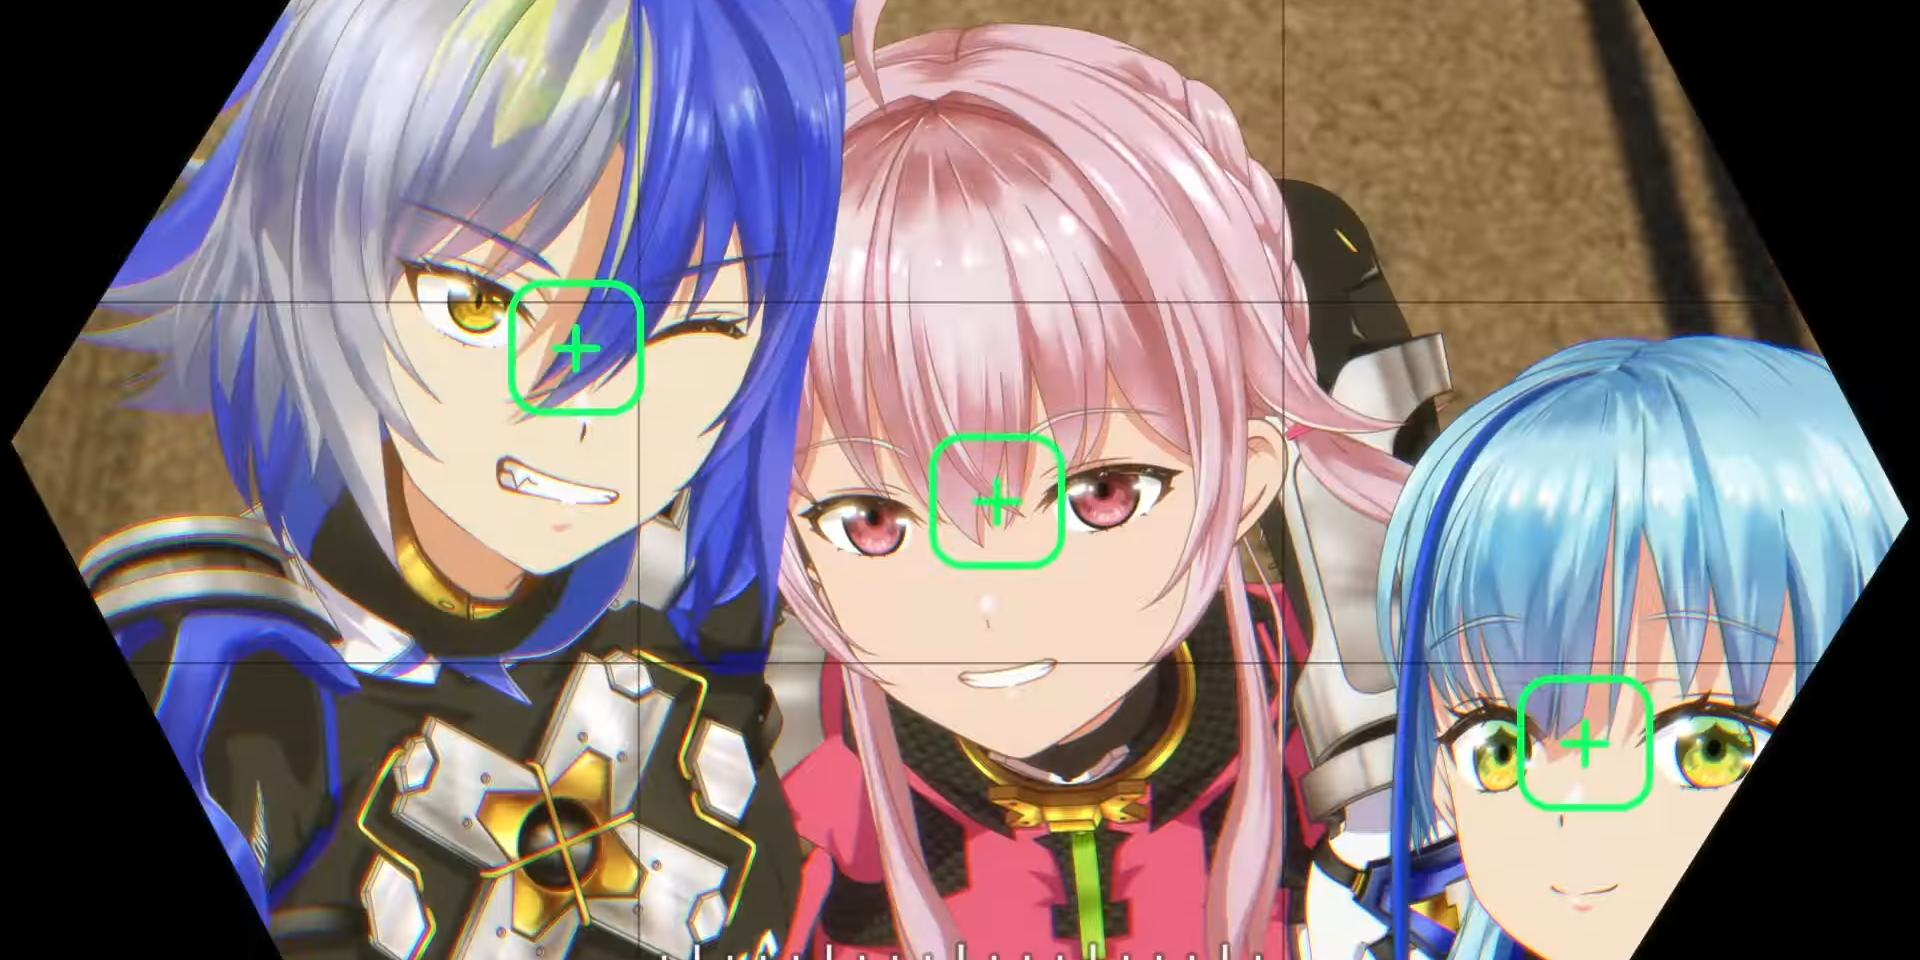 Rin Rindo and two other racers from Highspeed Étoile pose for a camera, as the shutter snaps from the camera's point of view.